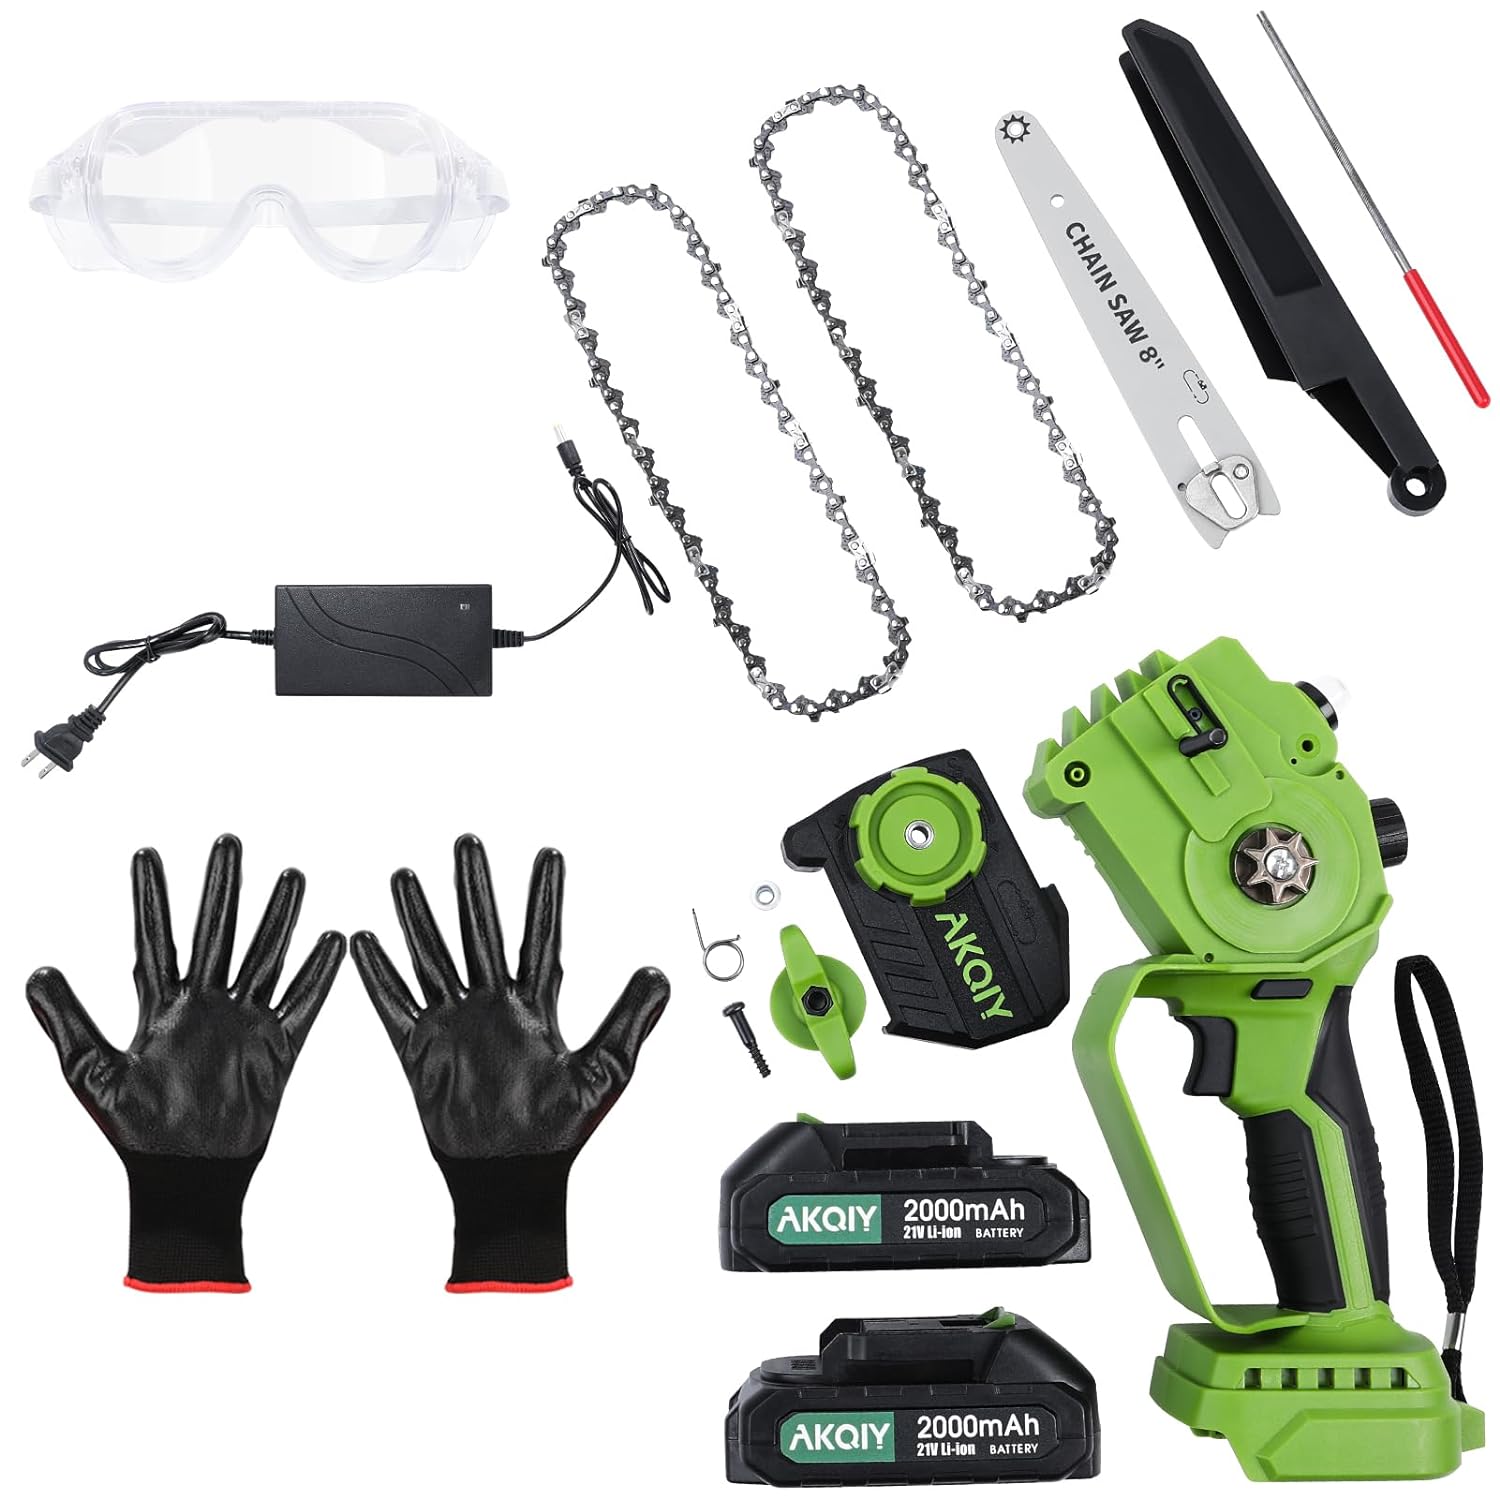 Mini Cordless Electric Chainsaw Kit -21V Upgrade Brushless Motor Portable One-Handed Rechargeable 8 Inch 450W Electric Chainsaw for Tree Trimming Branch Wood Cutting（2 Batteries,2 Chains)